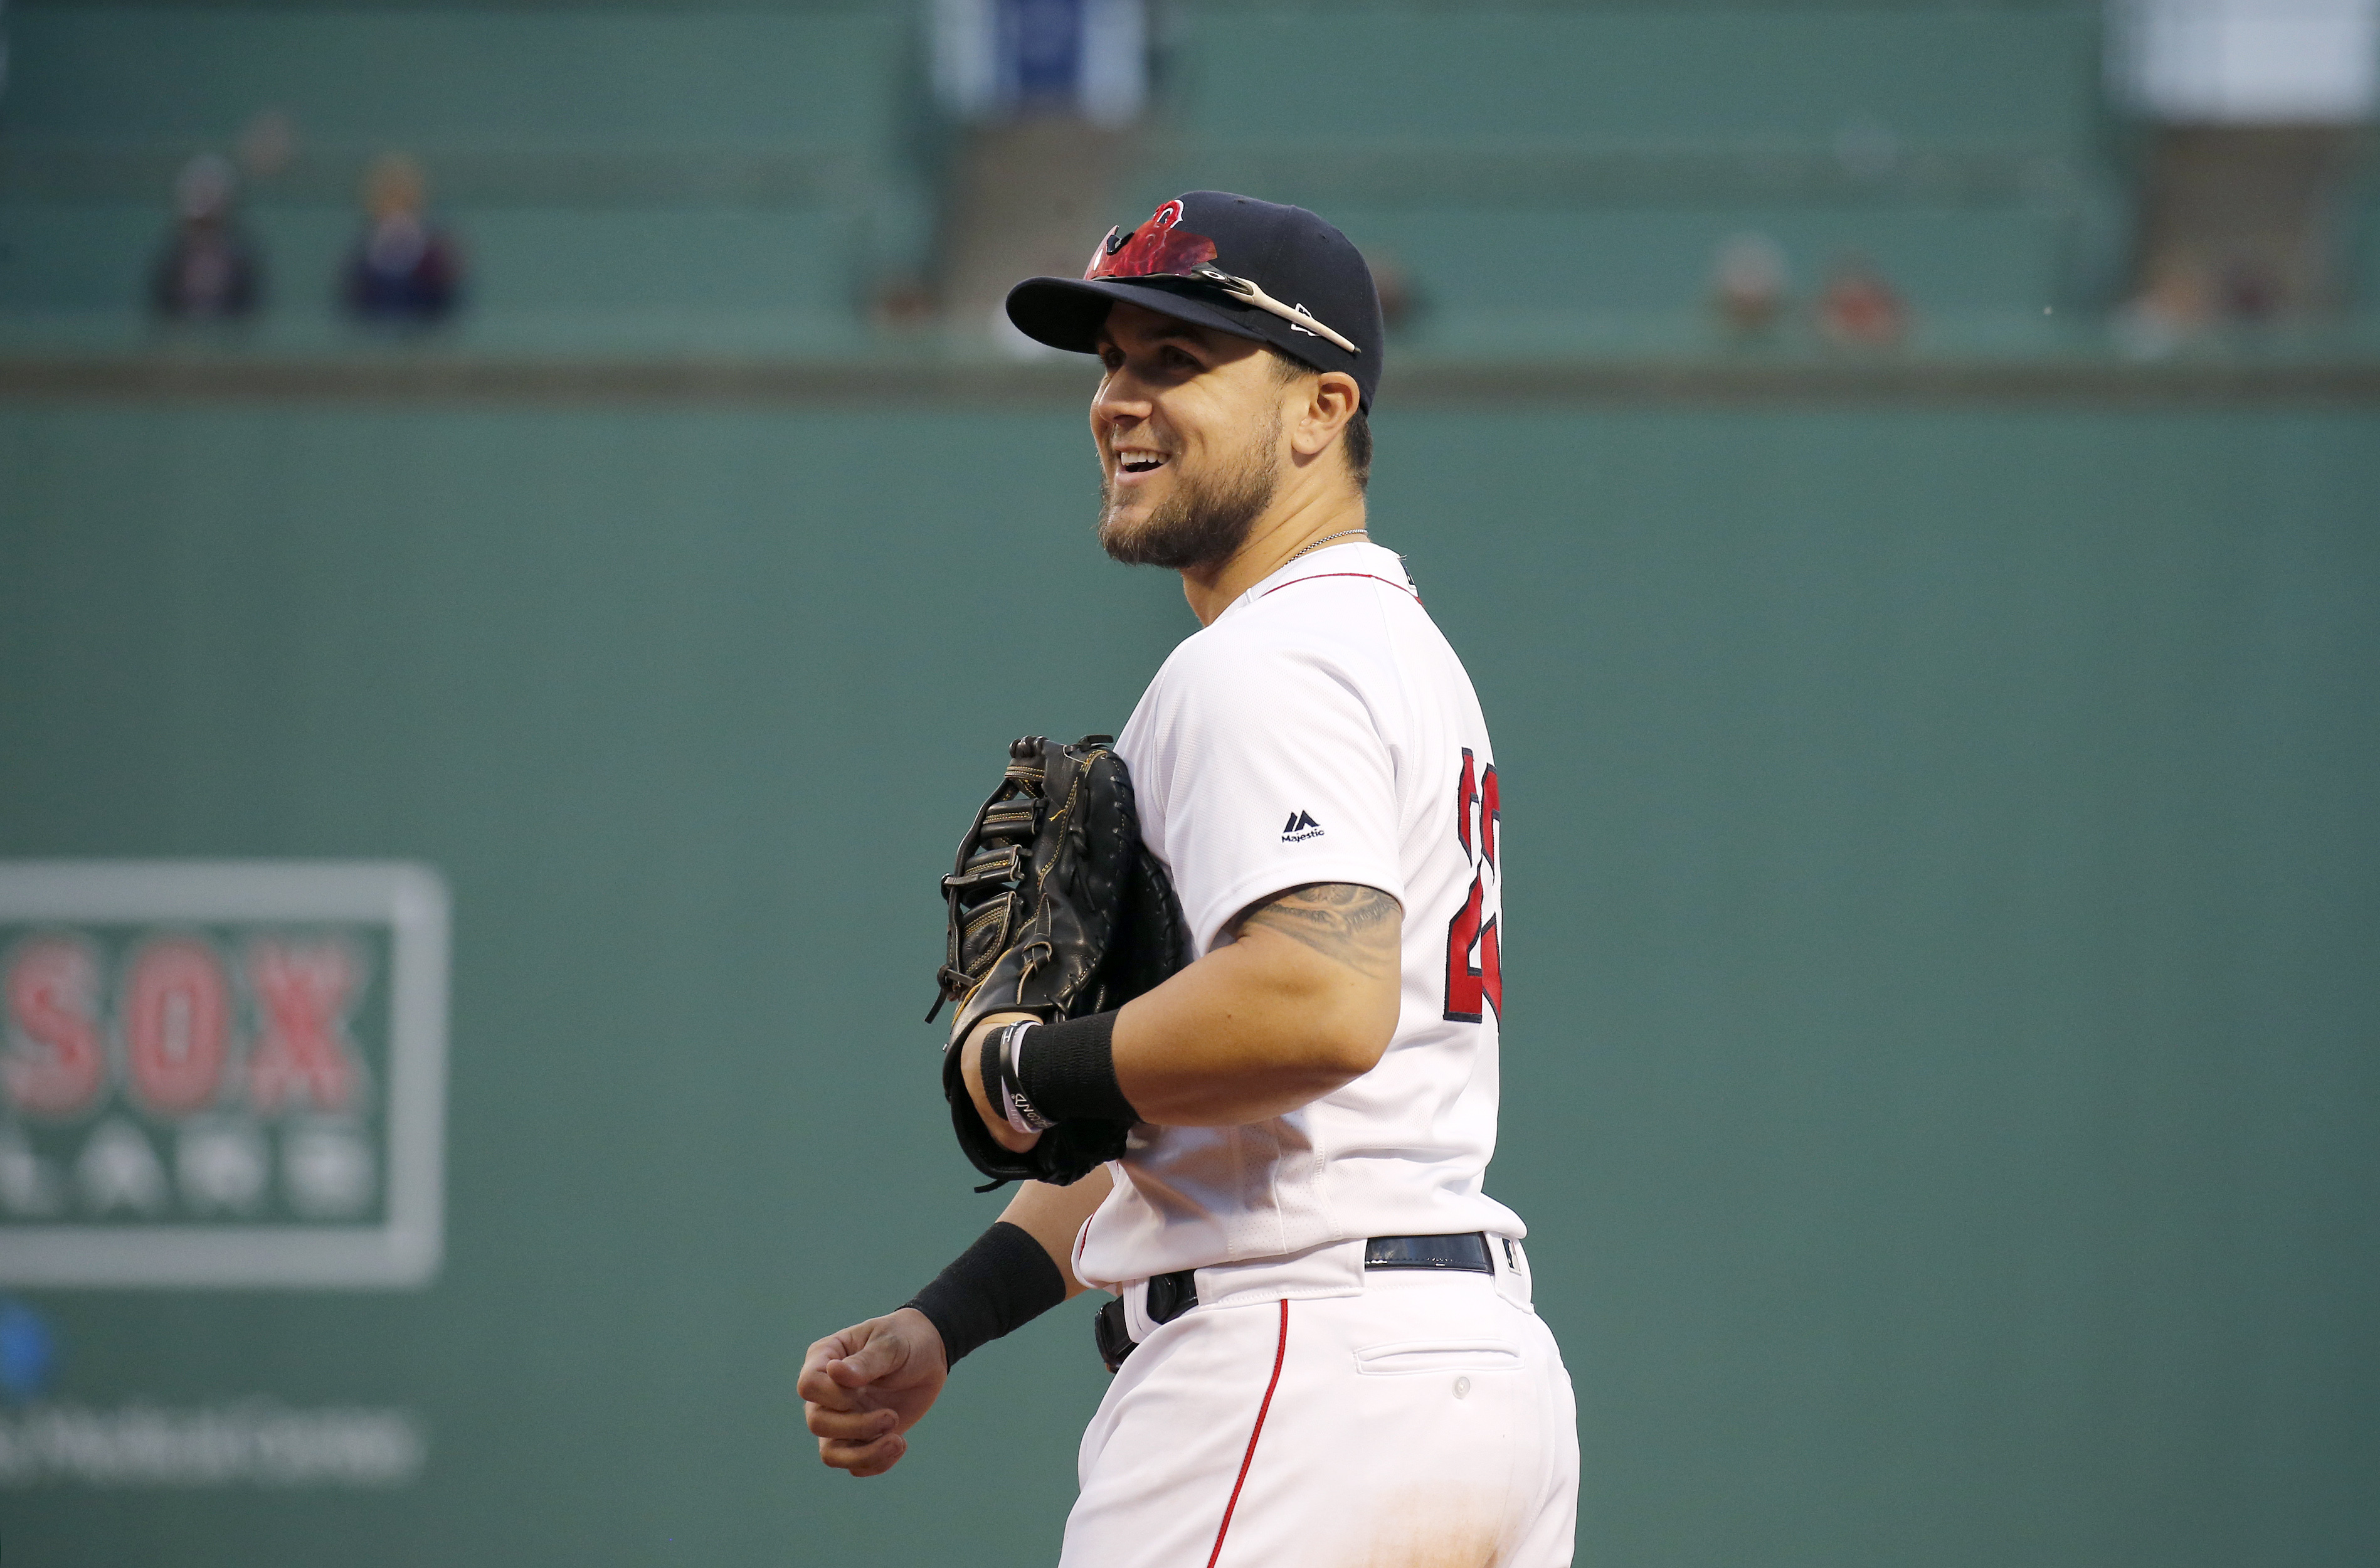 RED SOX NOTEBOOK: Chavis leads things off